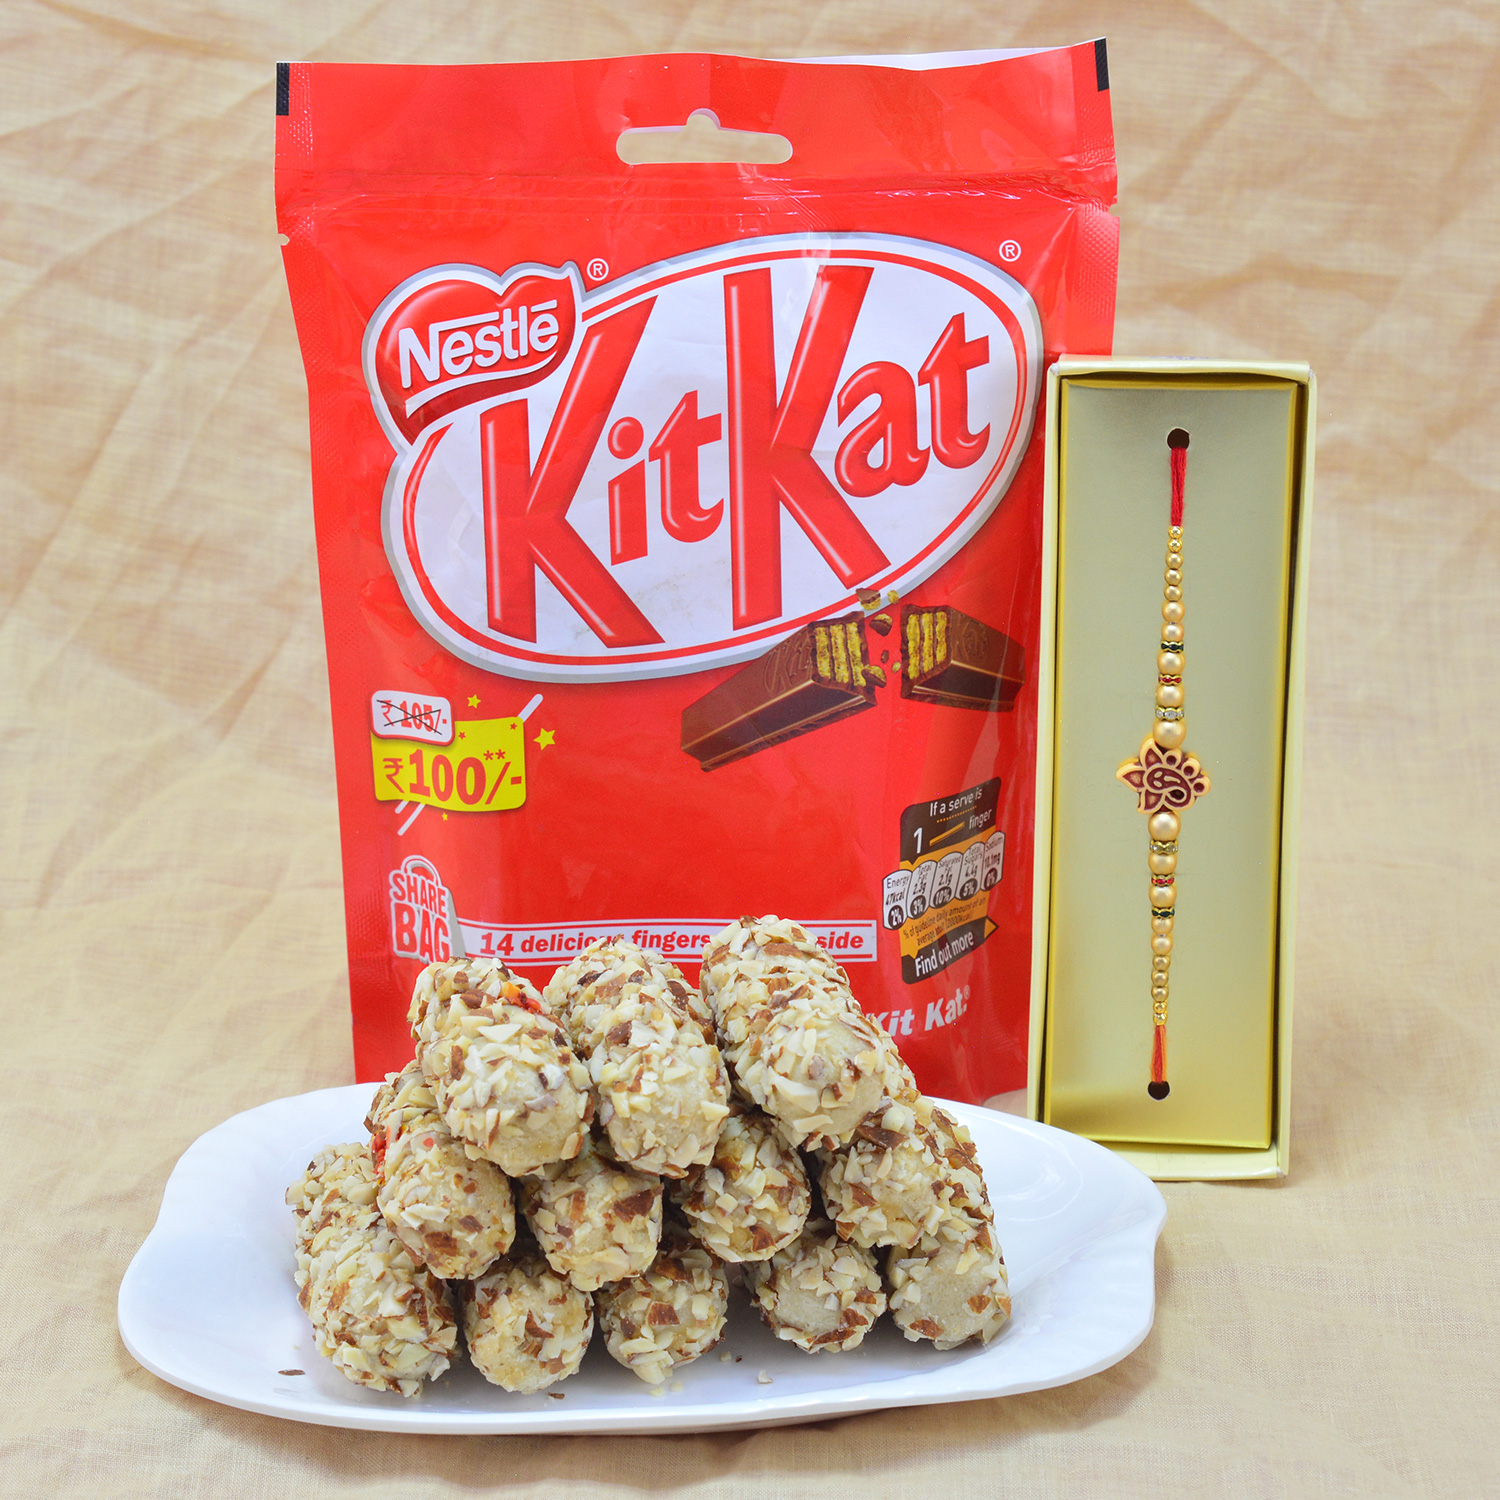 Amazing Beads Rakhi with Piquant Kaju Butterscotch Roll with Delicious Nestle Kitkat